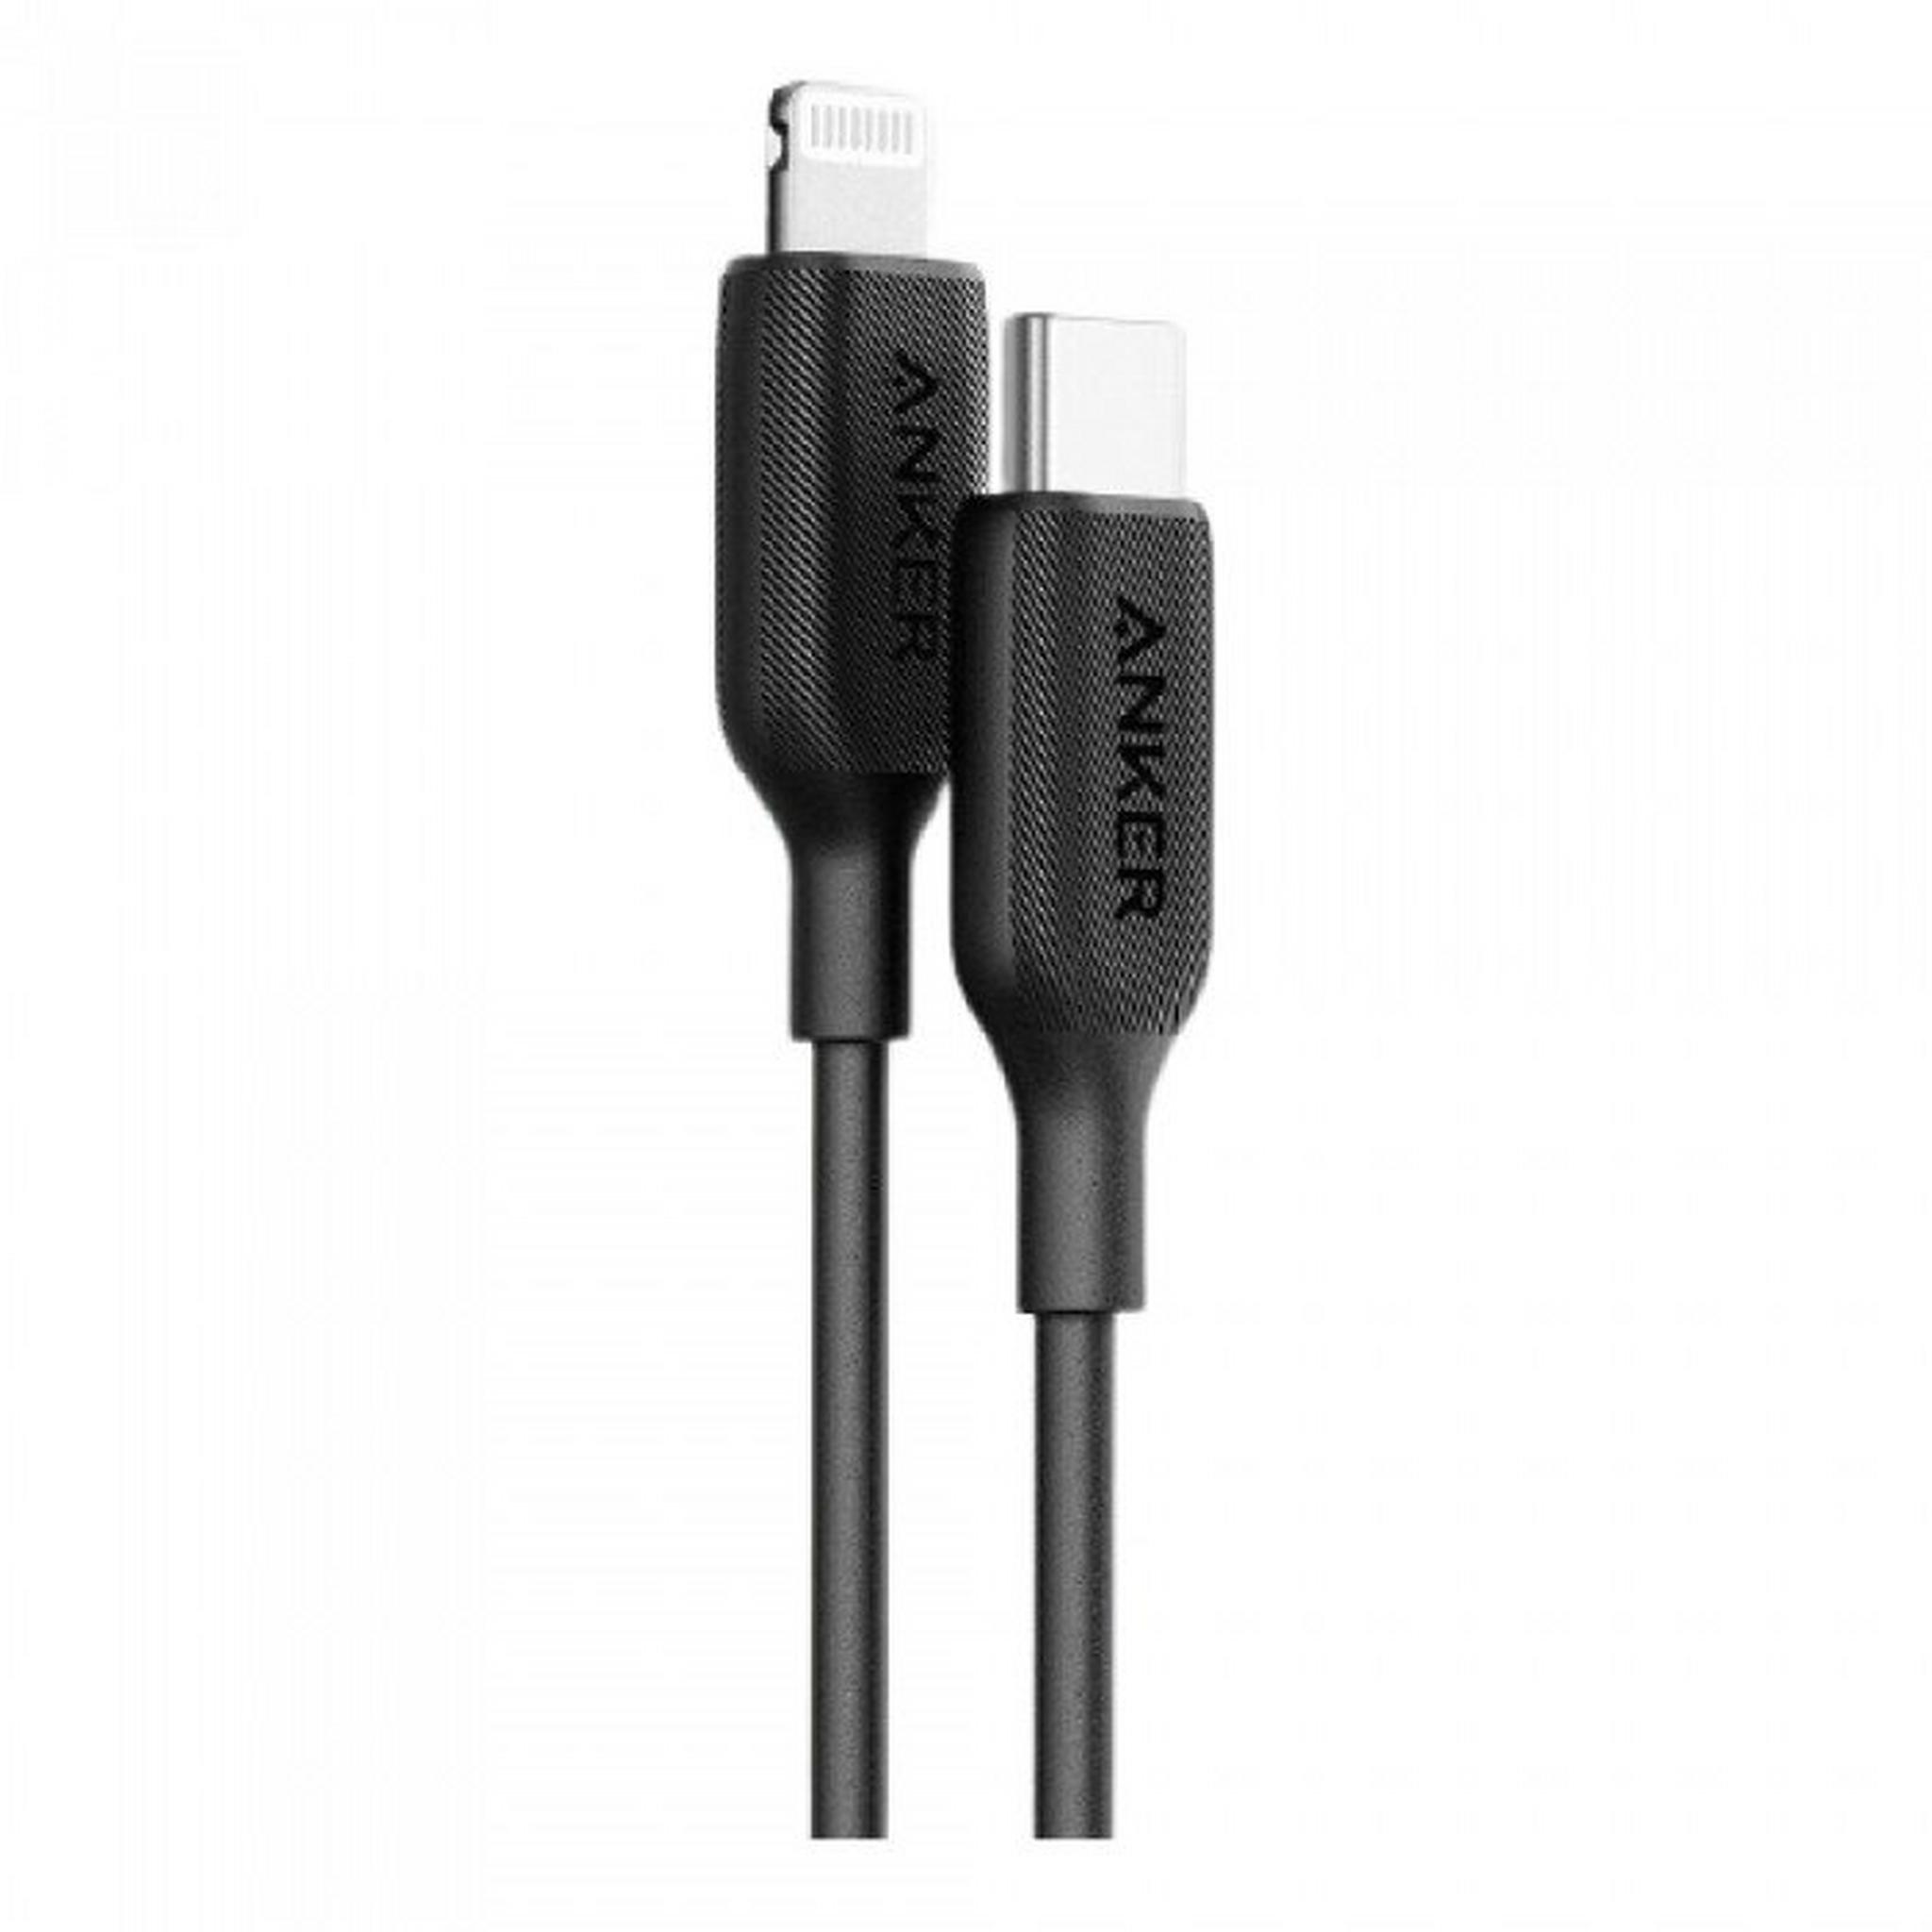 Anker Powerline III USB-C to Lighting (1.8m/6ft) Cable - Black